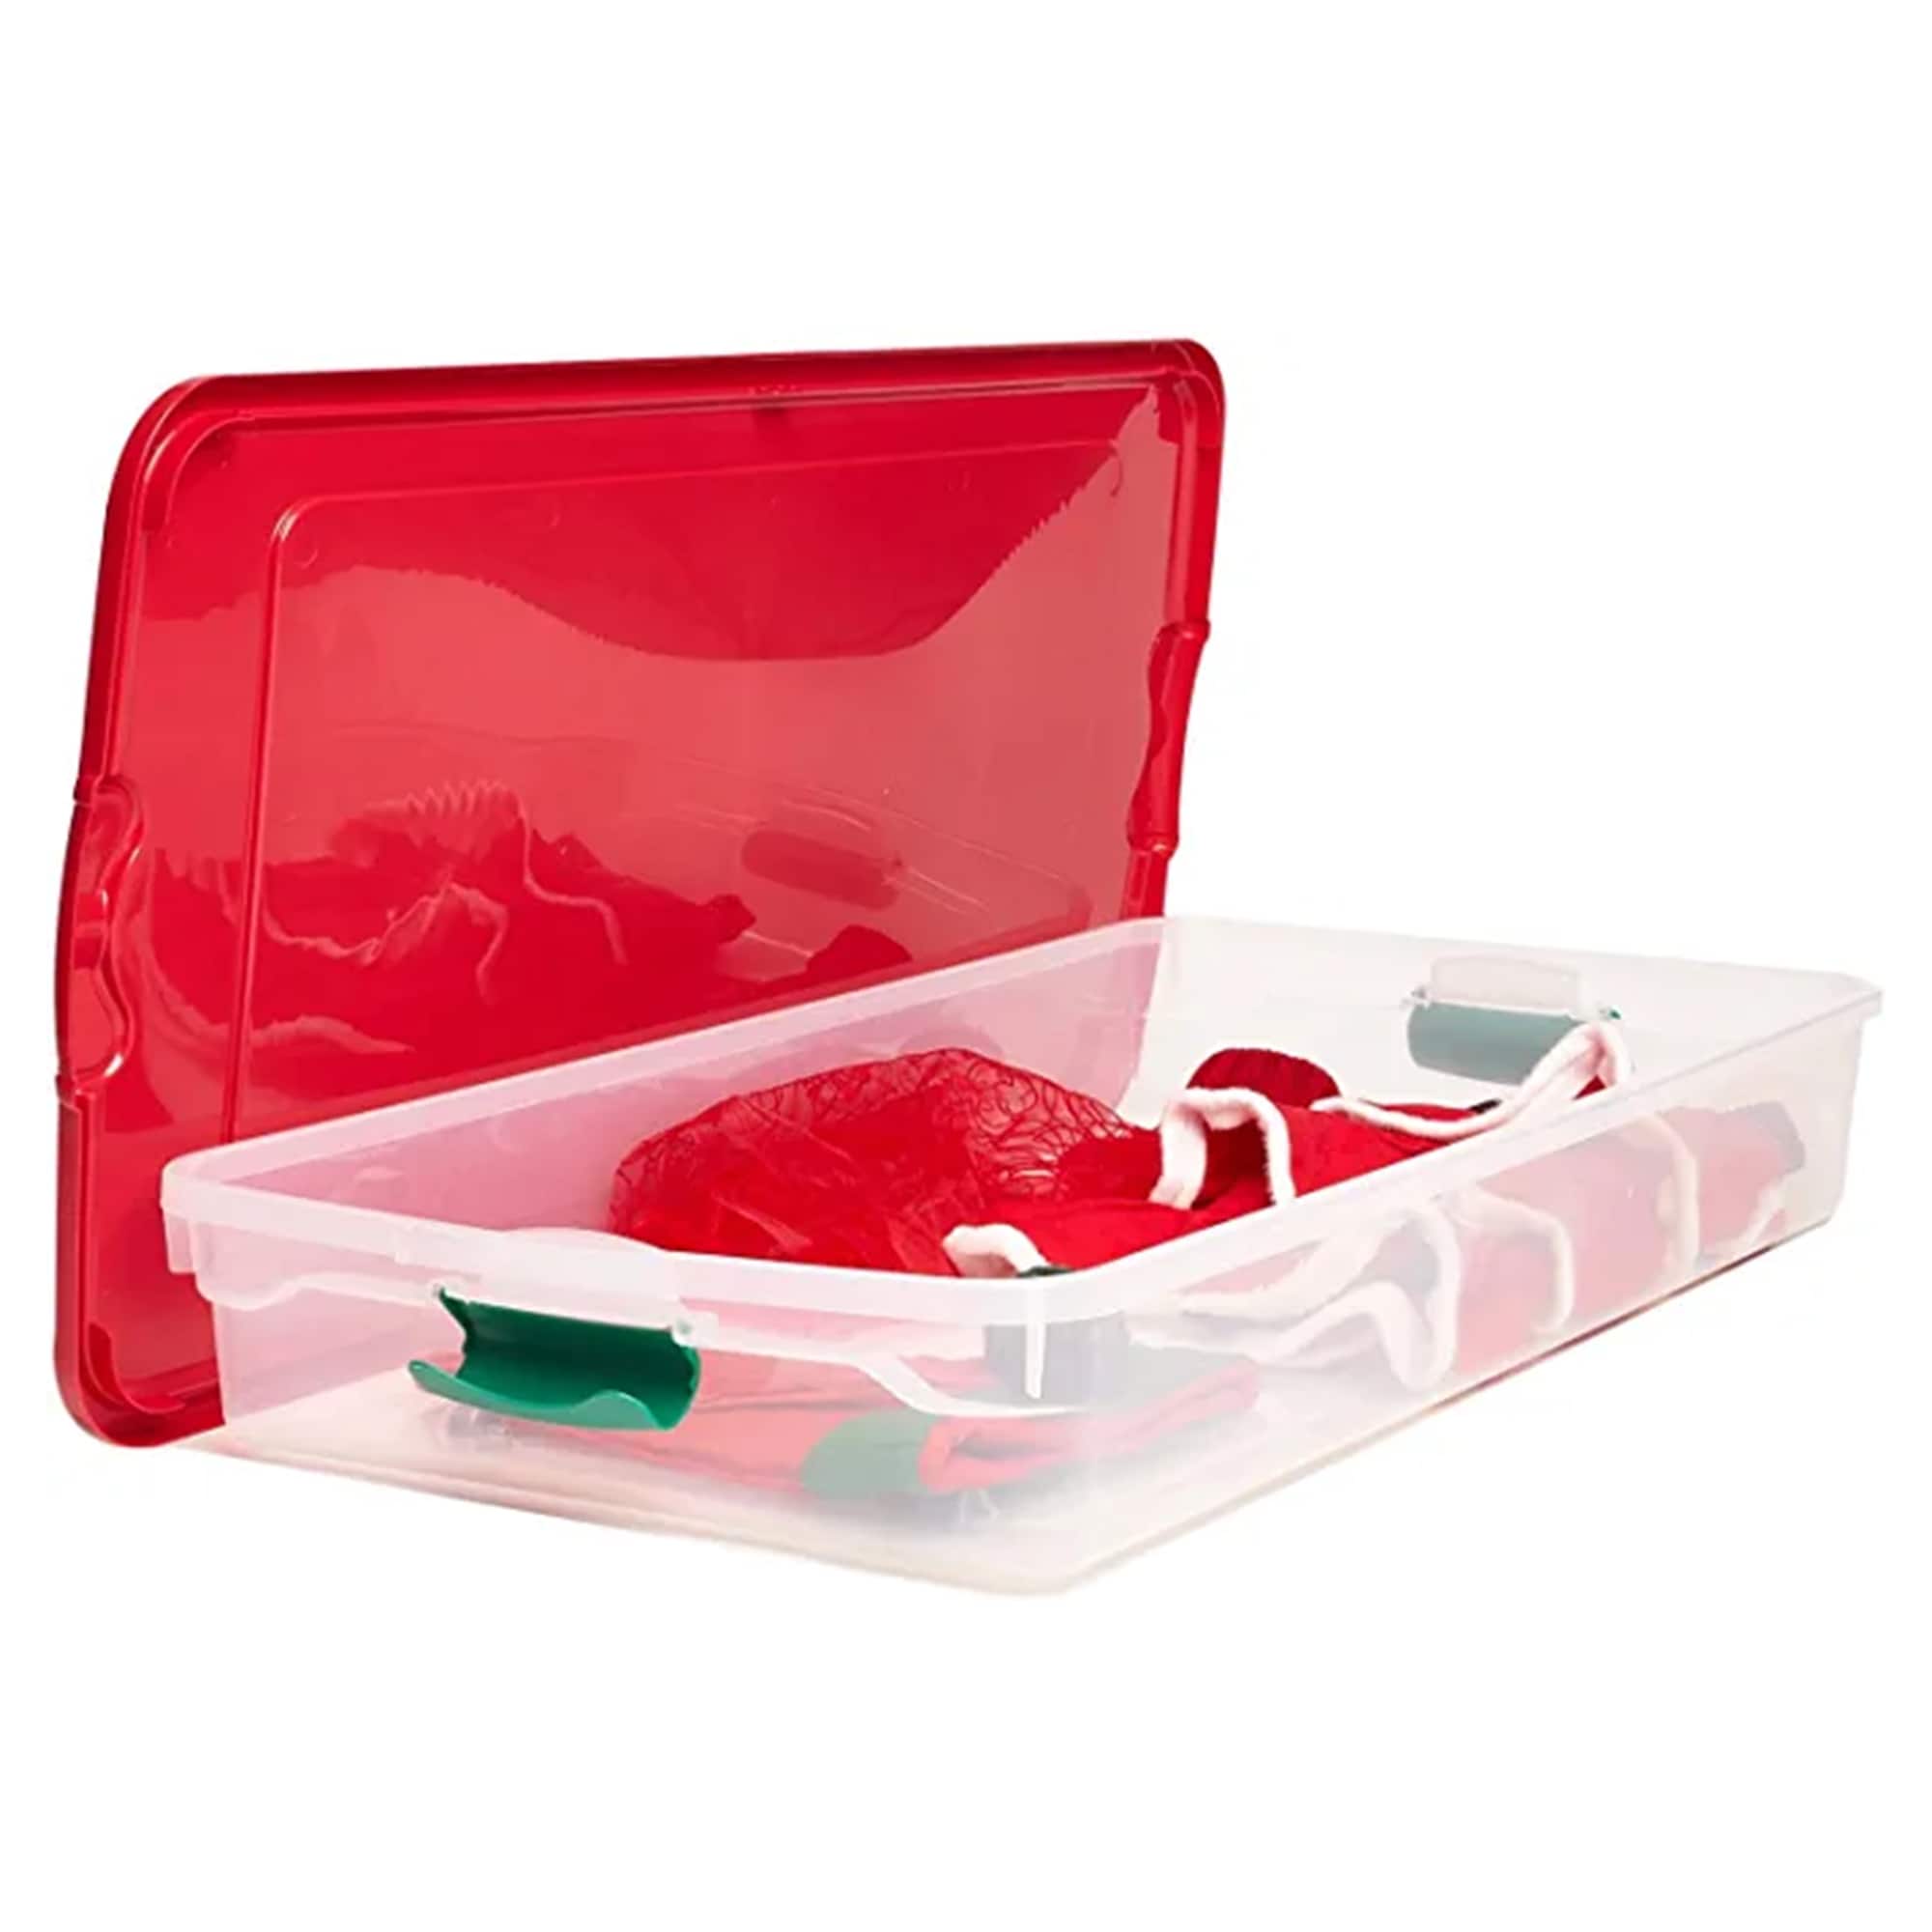 https://ak1.ostkcdn.com/images/products/is/images/direct/bbf466de9fecb5d7ad66d821738e831d3ba8711d/HOMZ-60-Quart-Latching-Holiday-Underbed-Storage-Container-Box%2C-Clear-%284-Pack%29.jpg